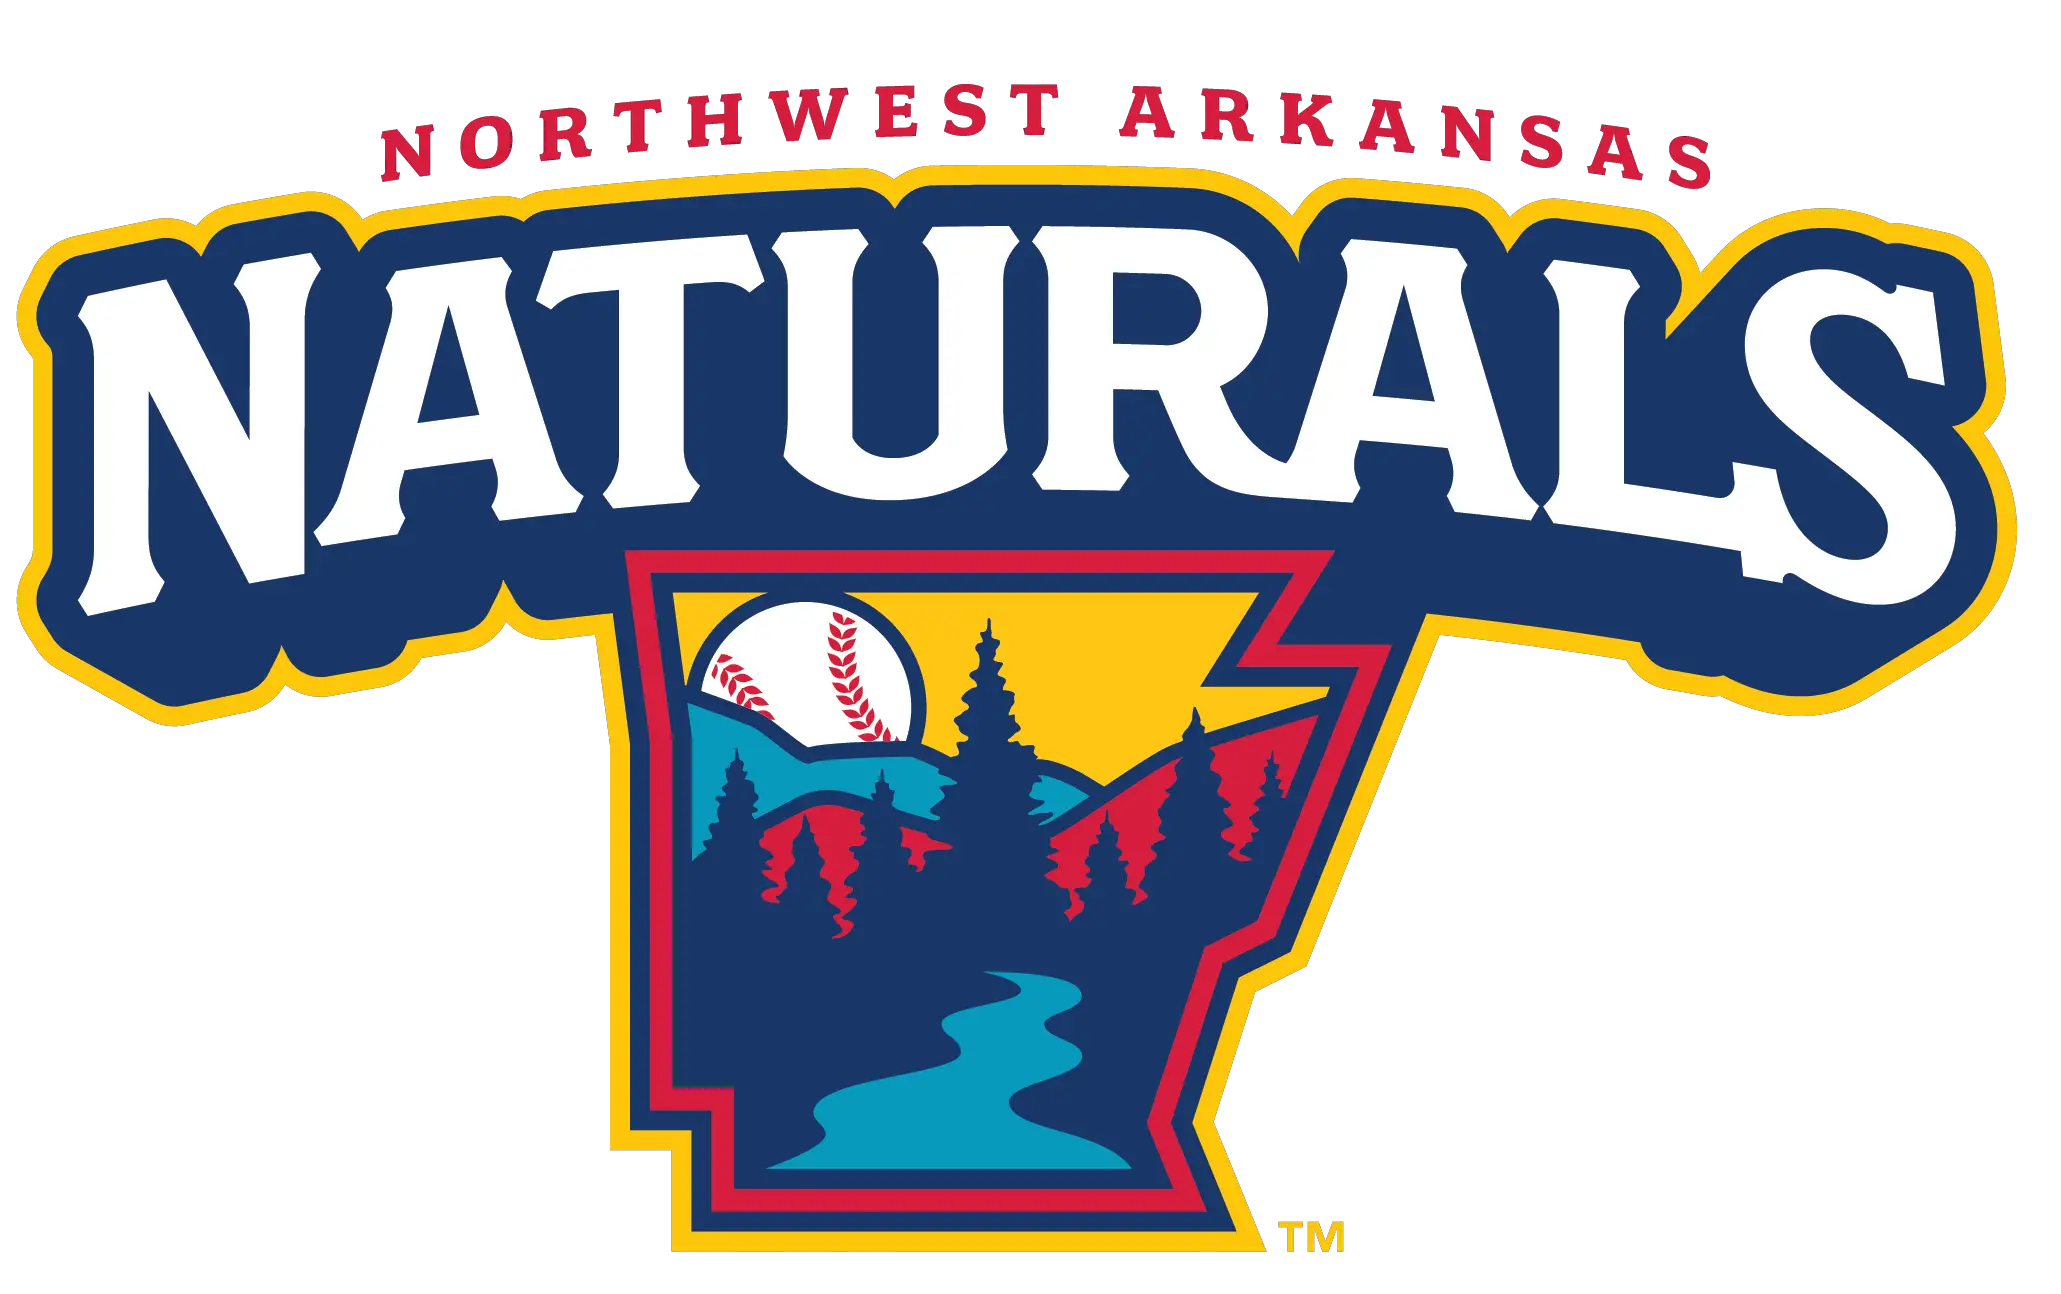  Naturals Game on Sunday, May 5th against Wichita Postponed 